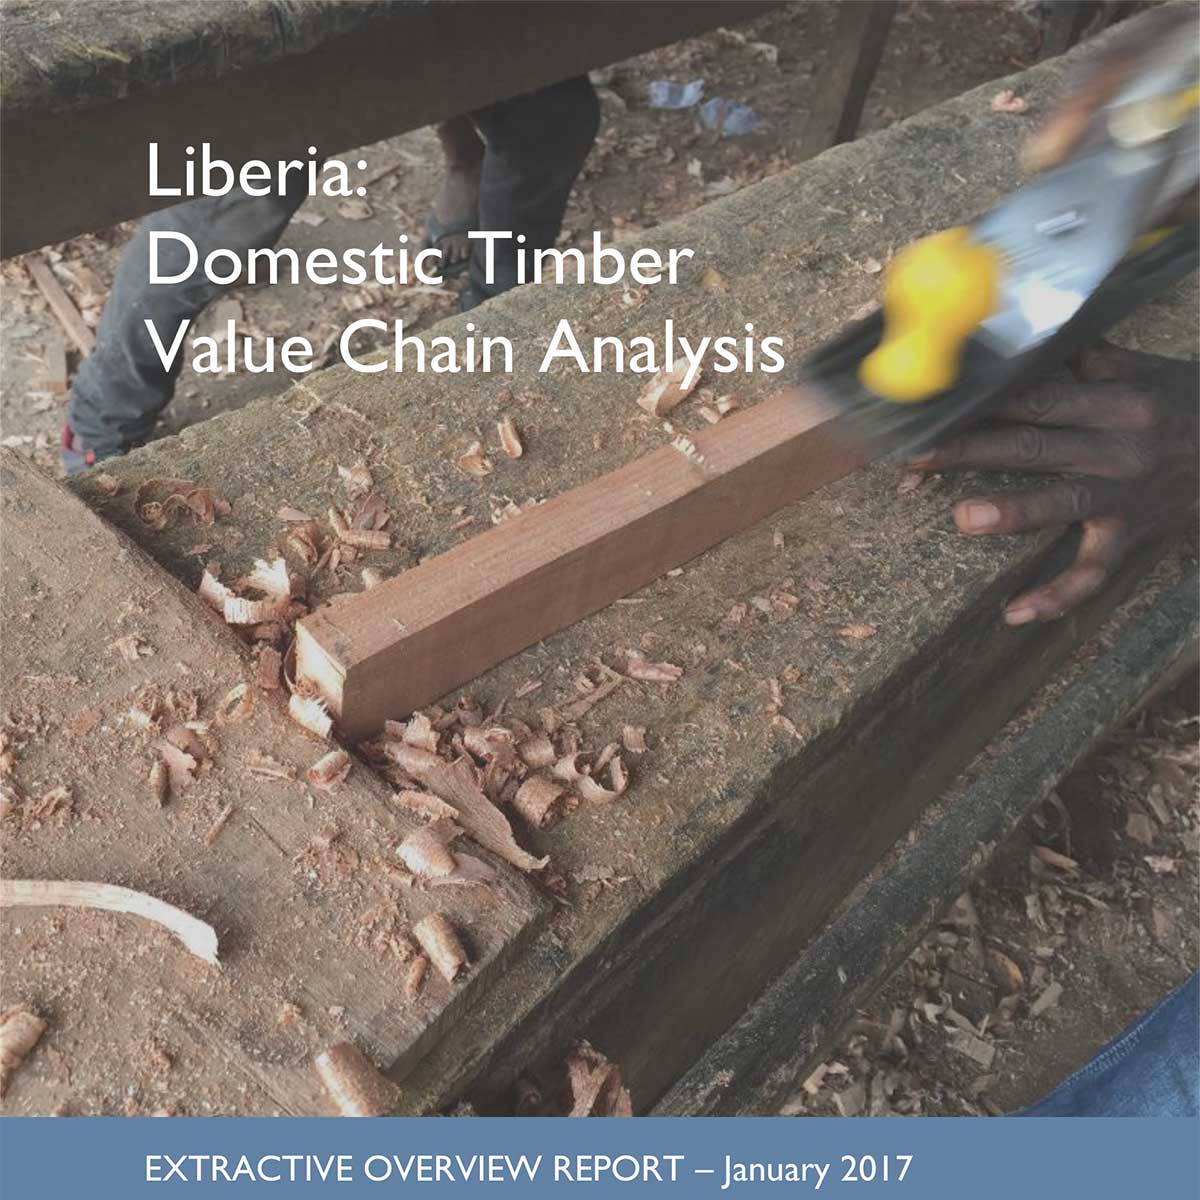 Liberia: Domestic Timber Value Chain Analysis (2017)